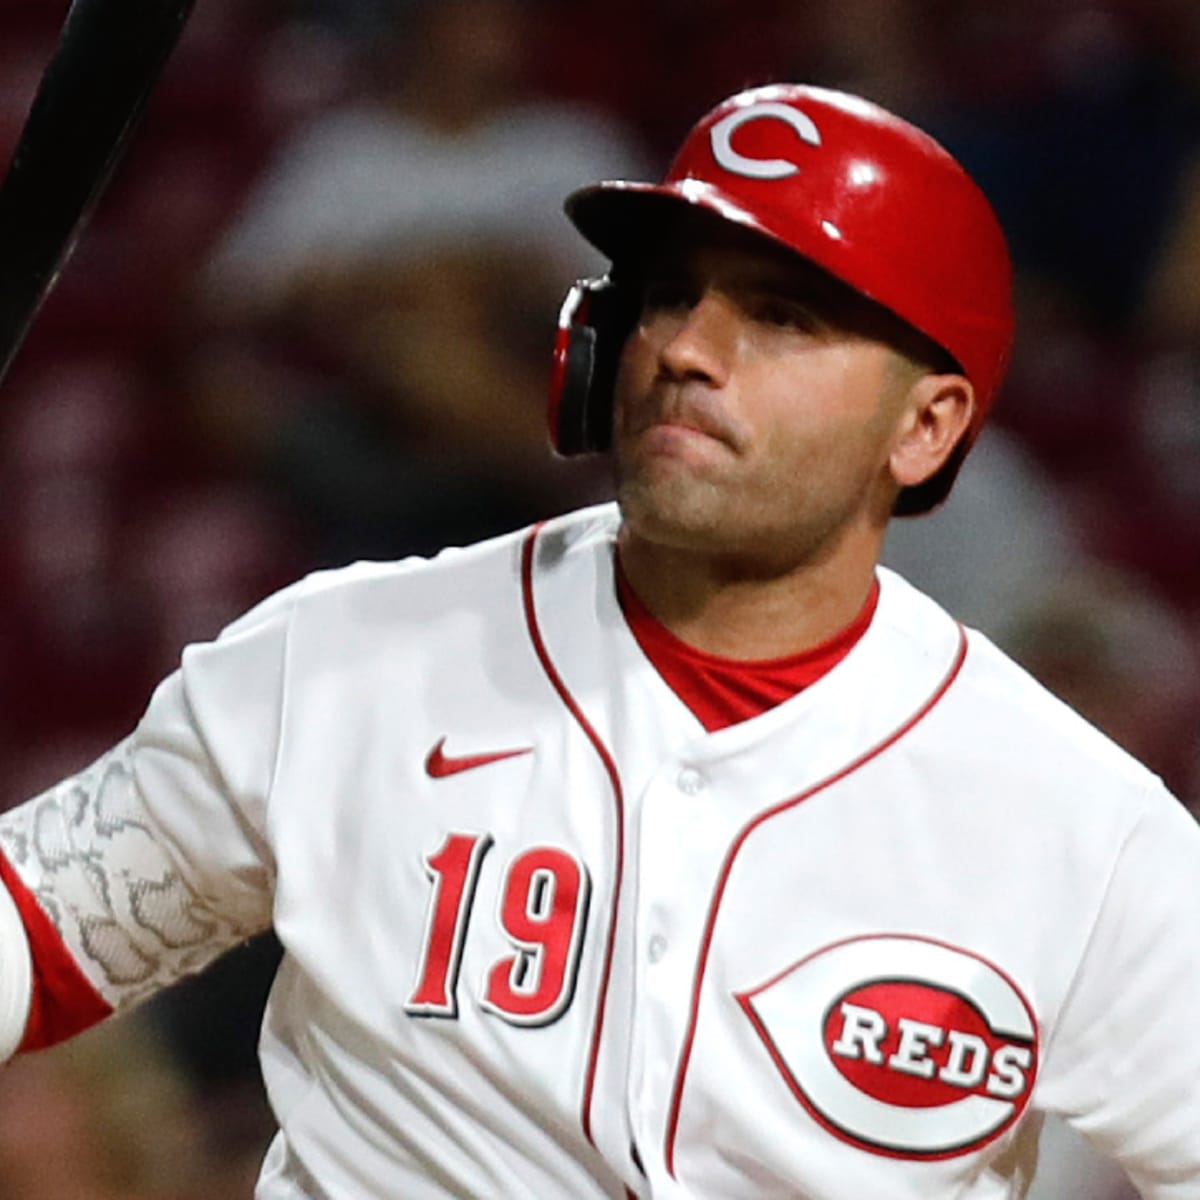 Joey Votto homers in Reds return after 10-month absence